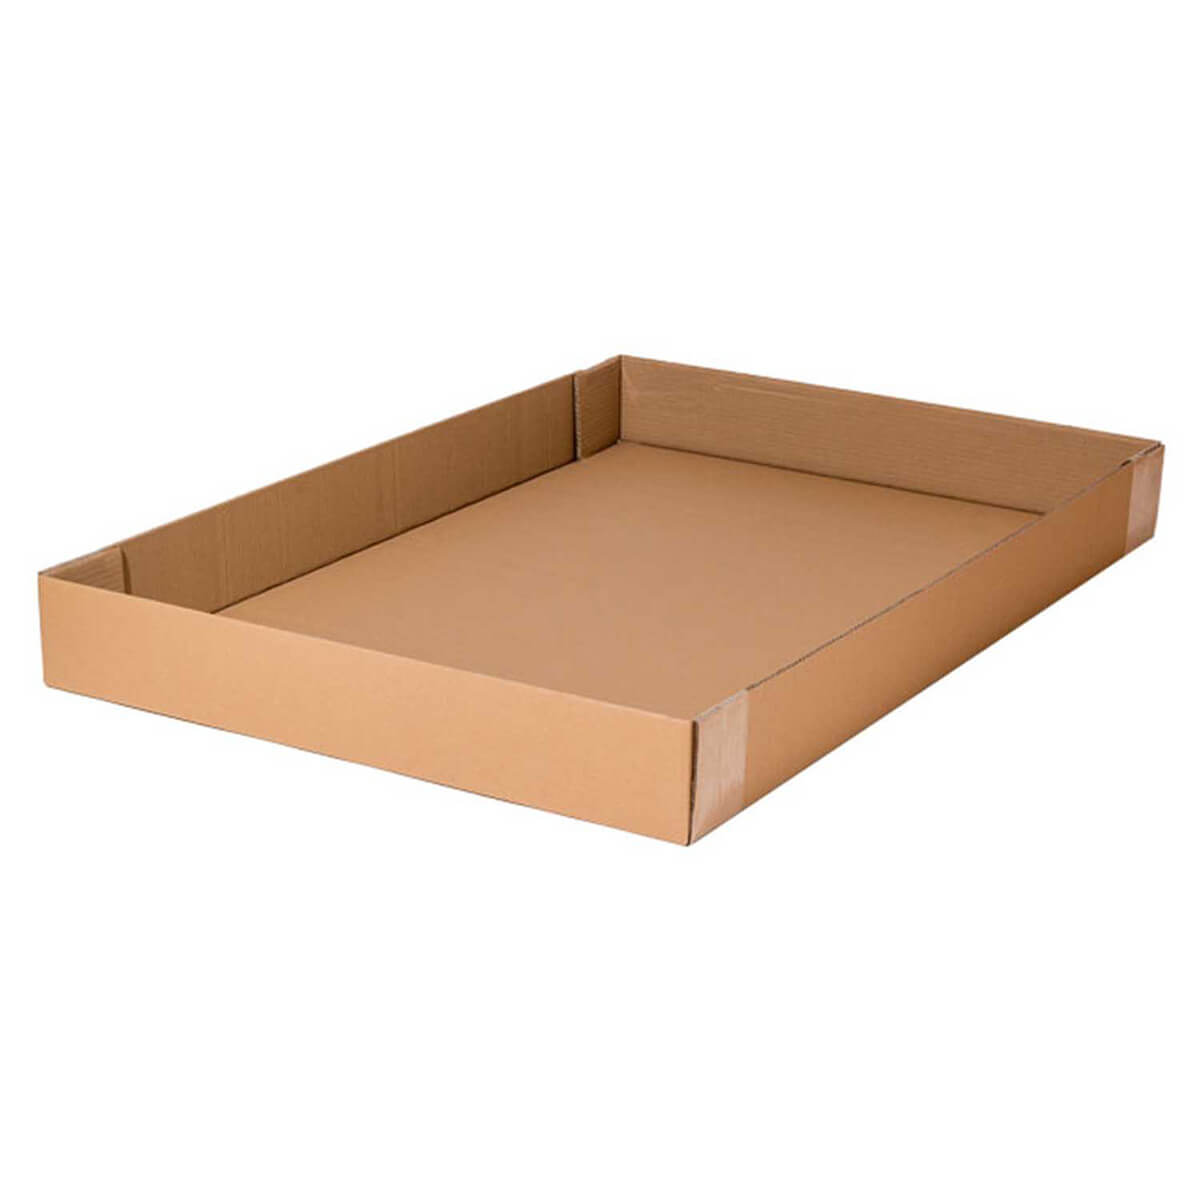 Cardboard blanks for cardboard containers 1200 x 800 x 125 mm